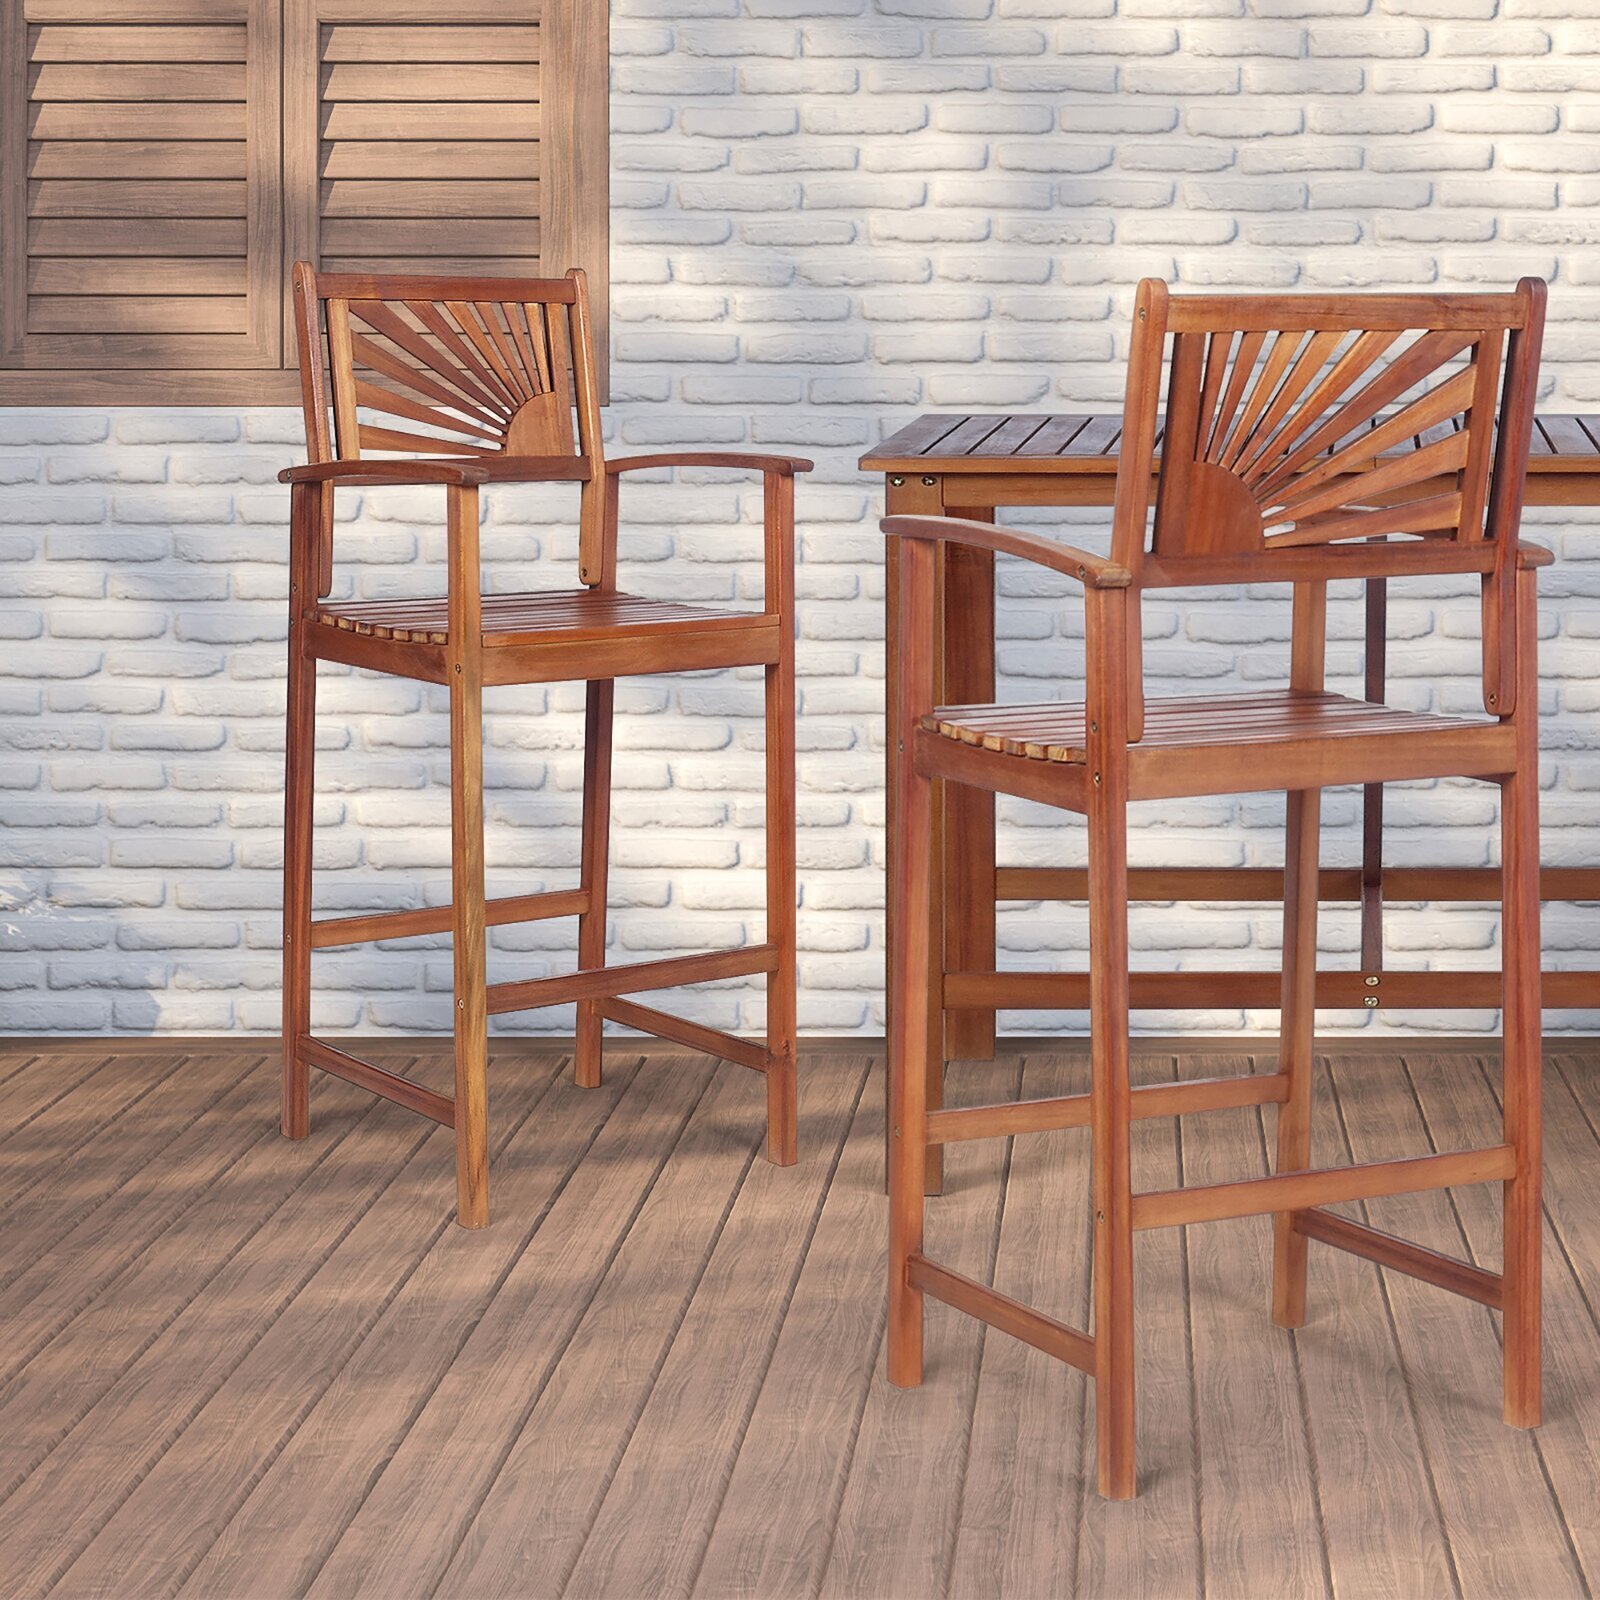 Soft Woven Back Outdoor Stool 2 Piece